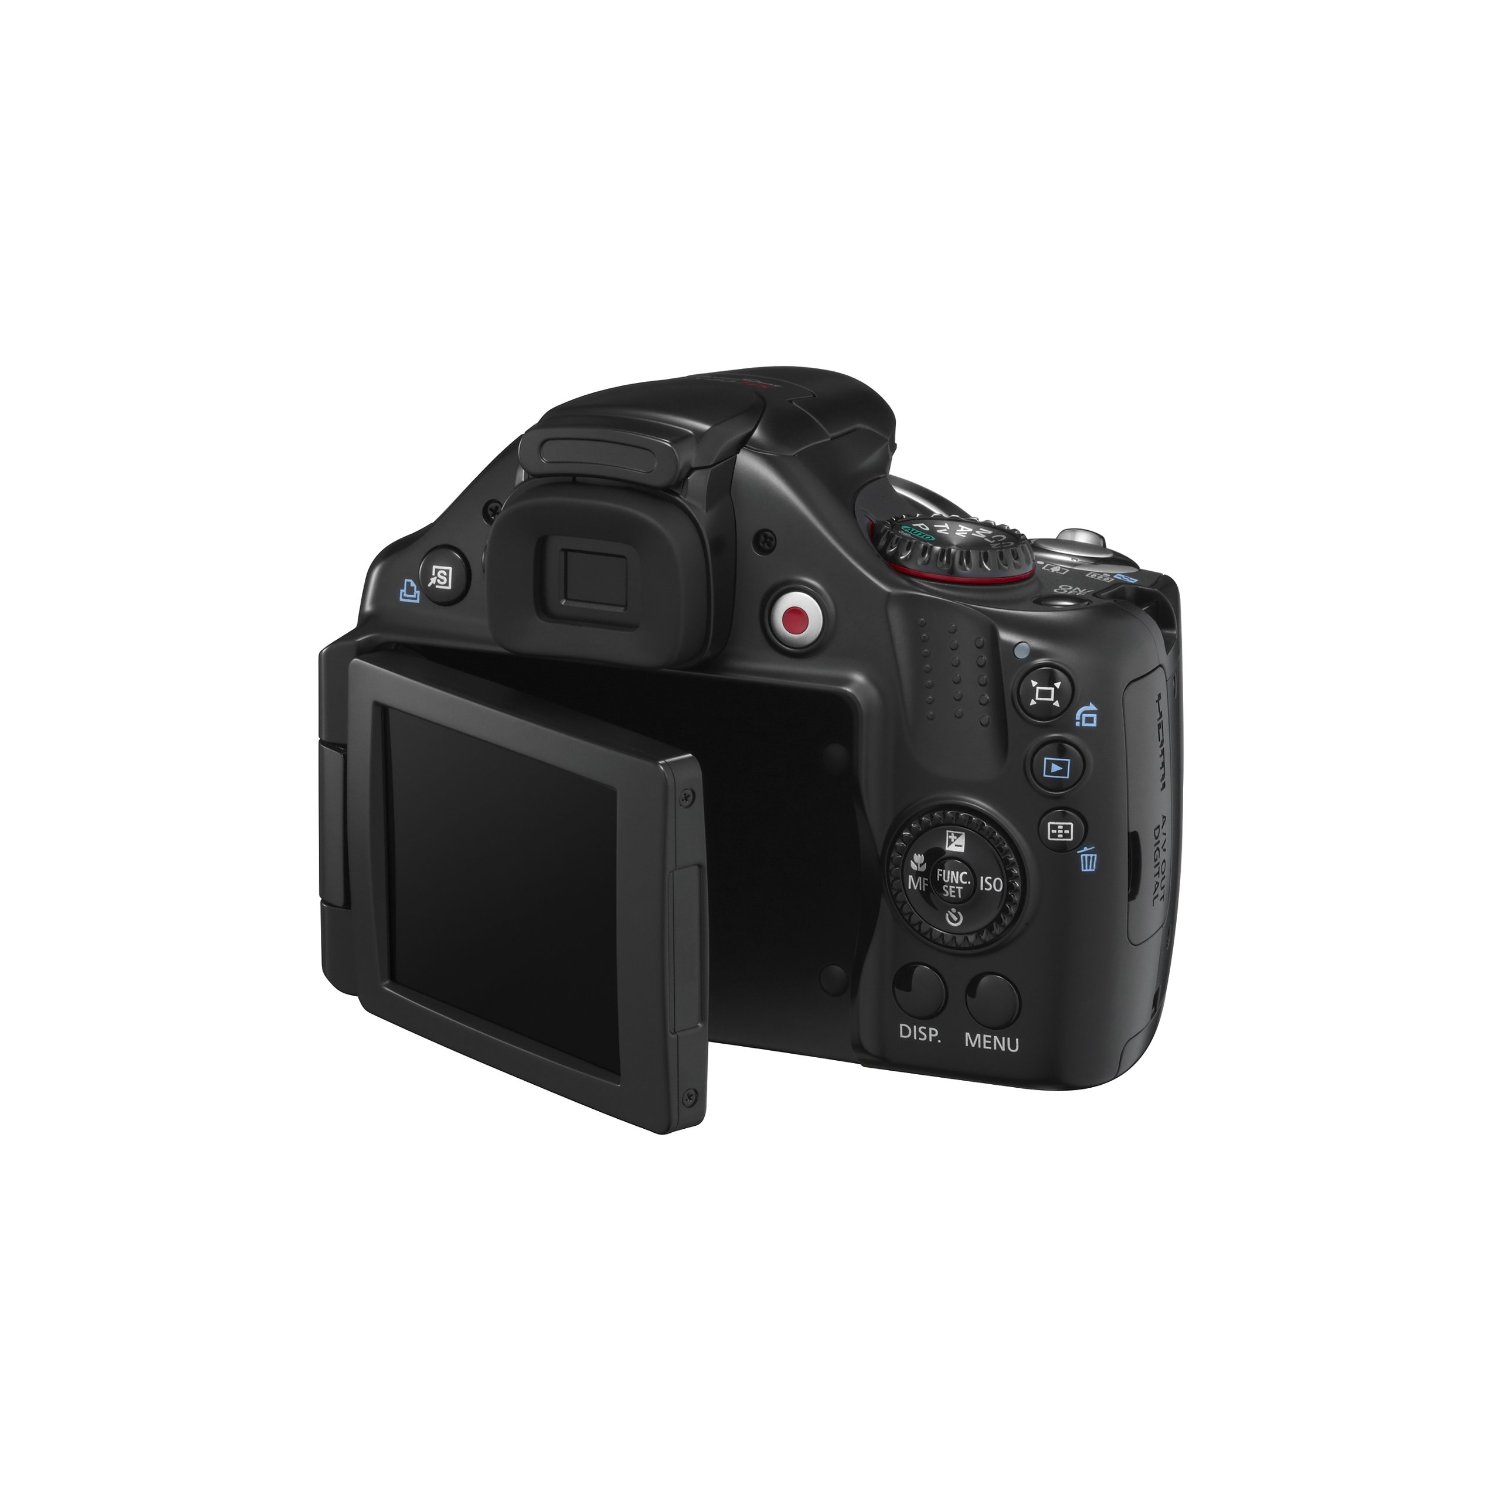 http://thetechjournal.com/wp-content/uploads/images/1110/1319693952-canons-new-sx40-hs-121mp-digital-camera-9.jpg